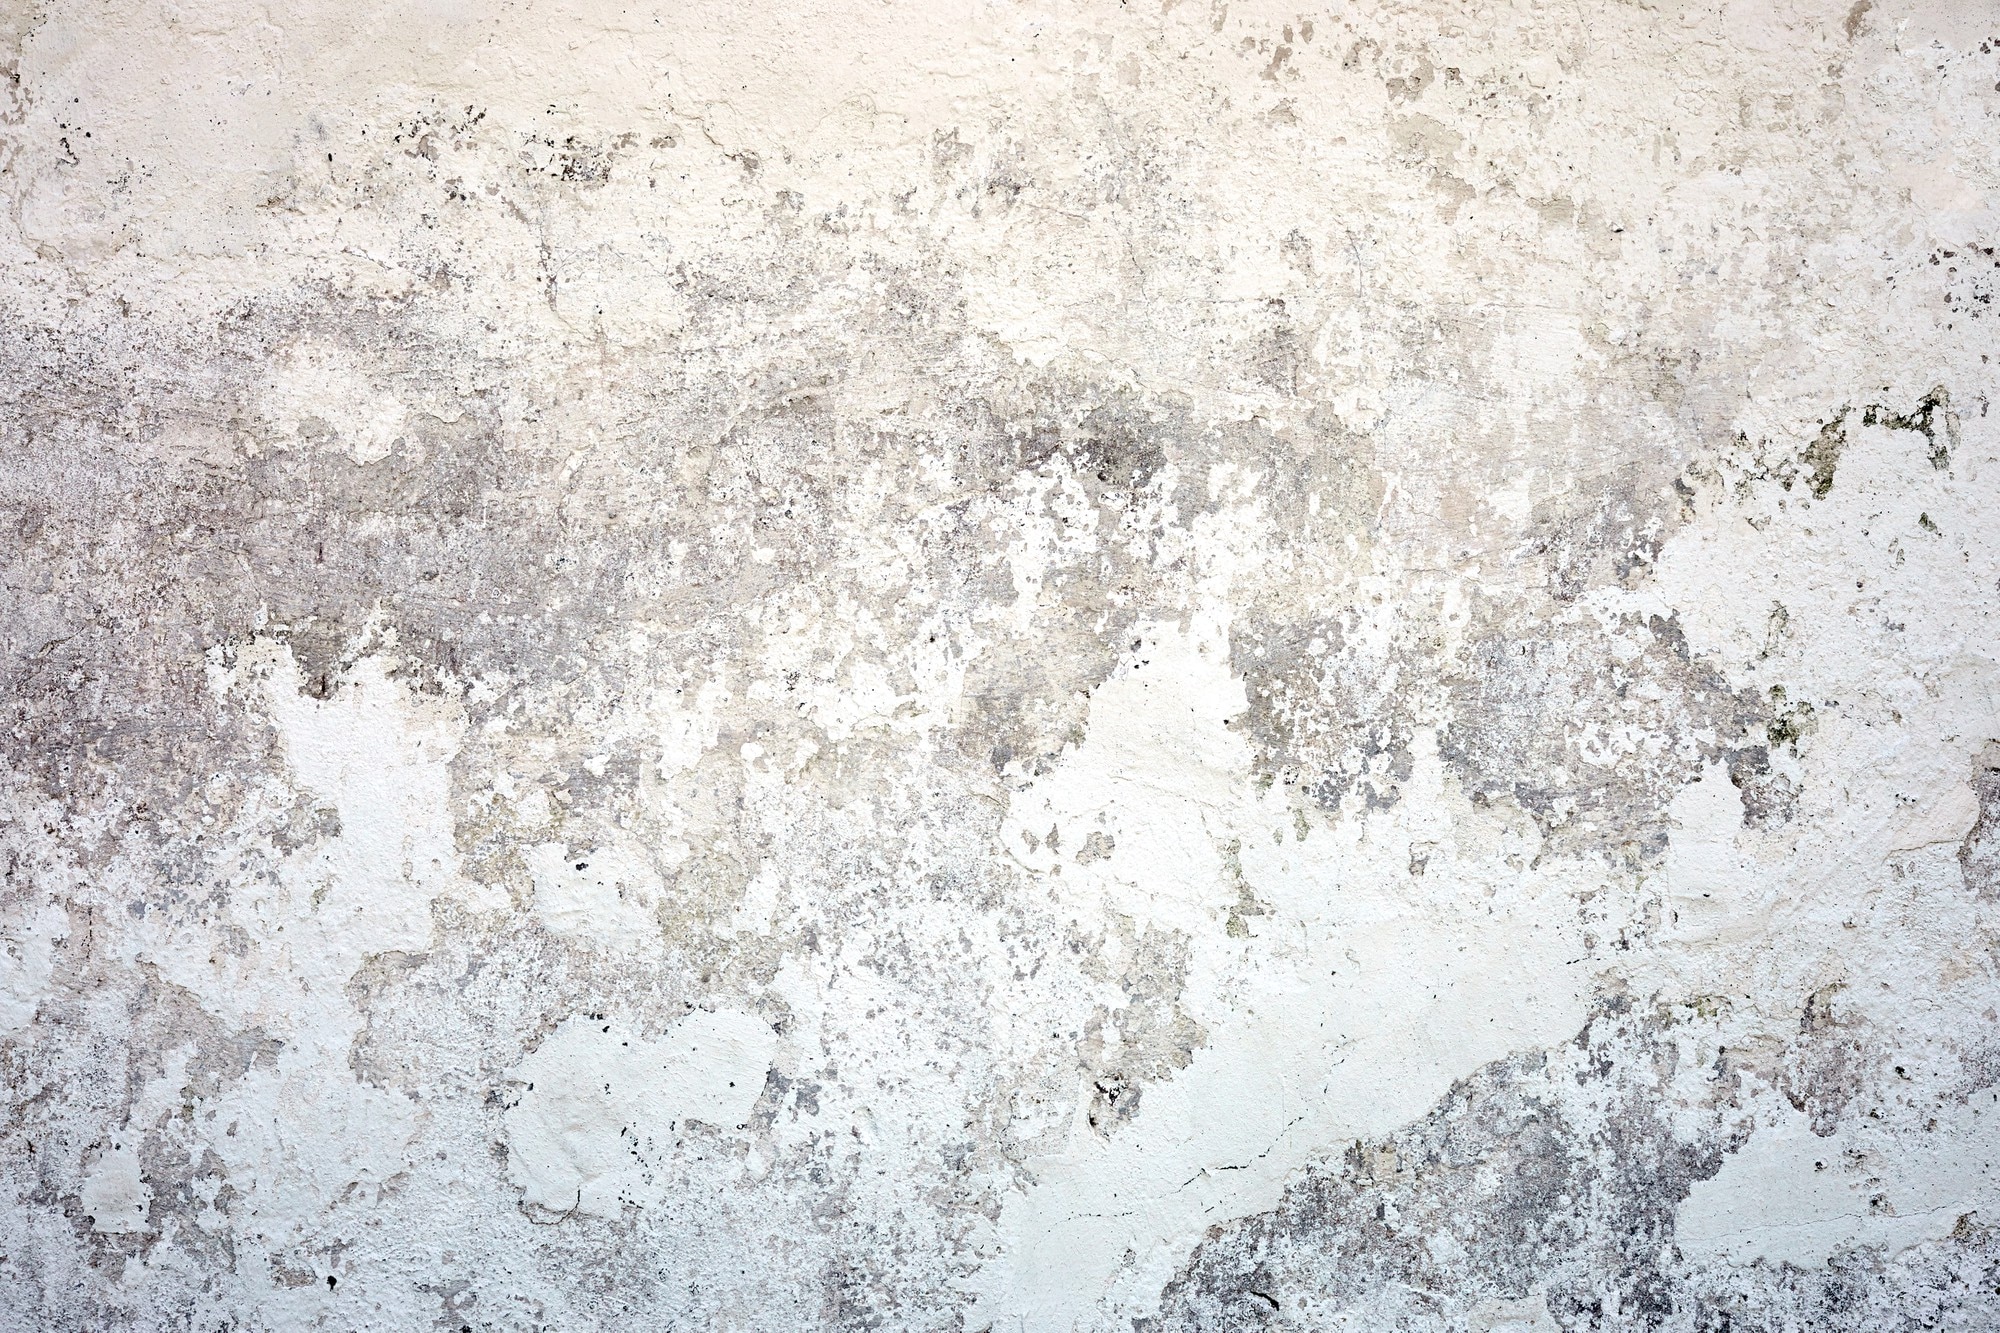 Dirty Wall Images - Free Download on Freepik